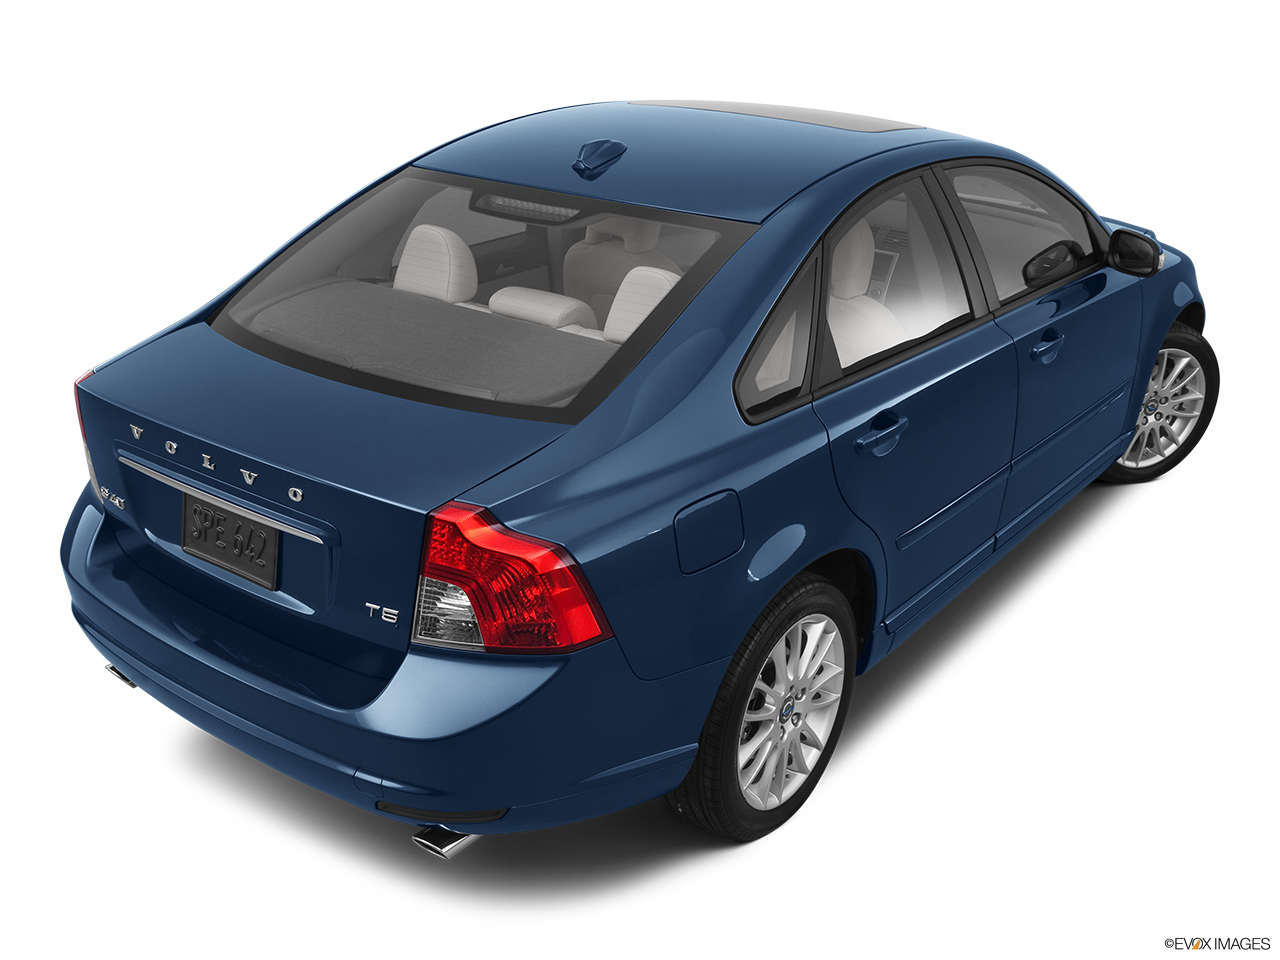 2011 Volvo S40 T5 A Rear 3/4 angle view. 